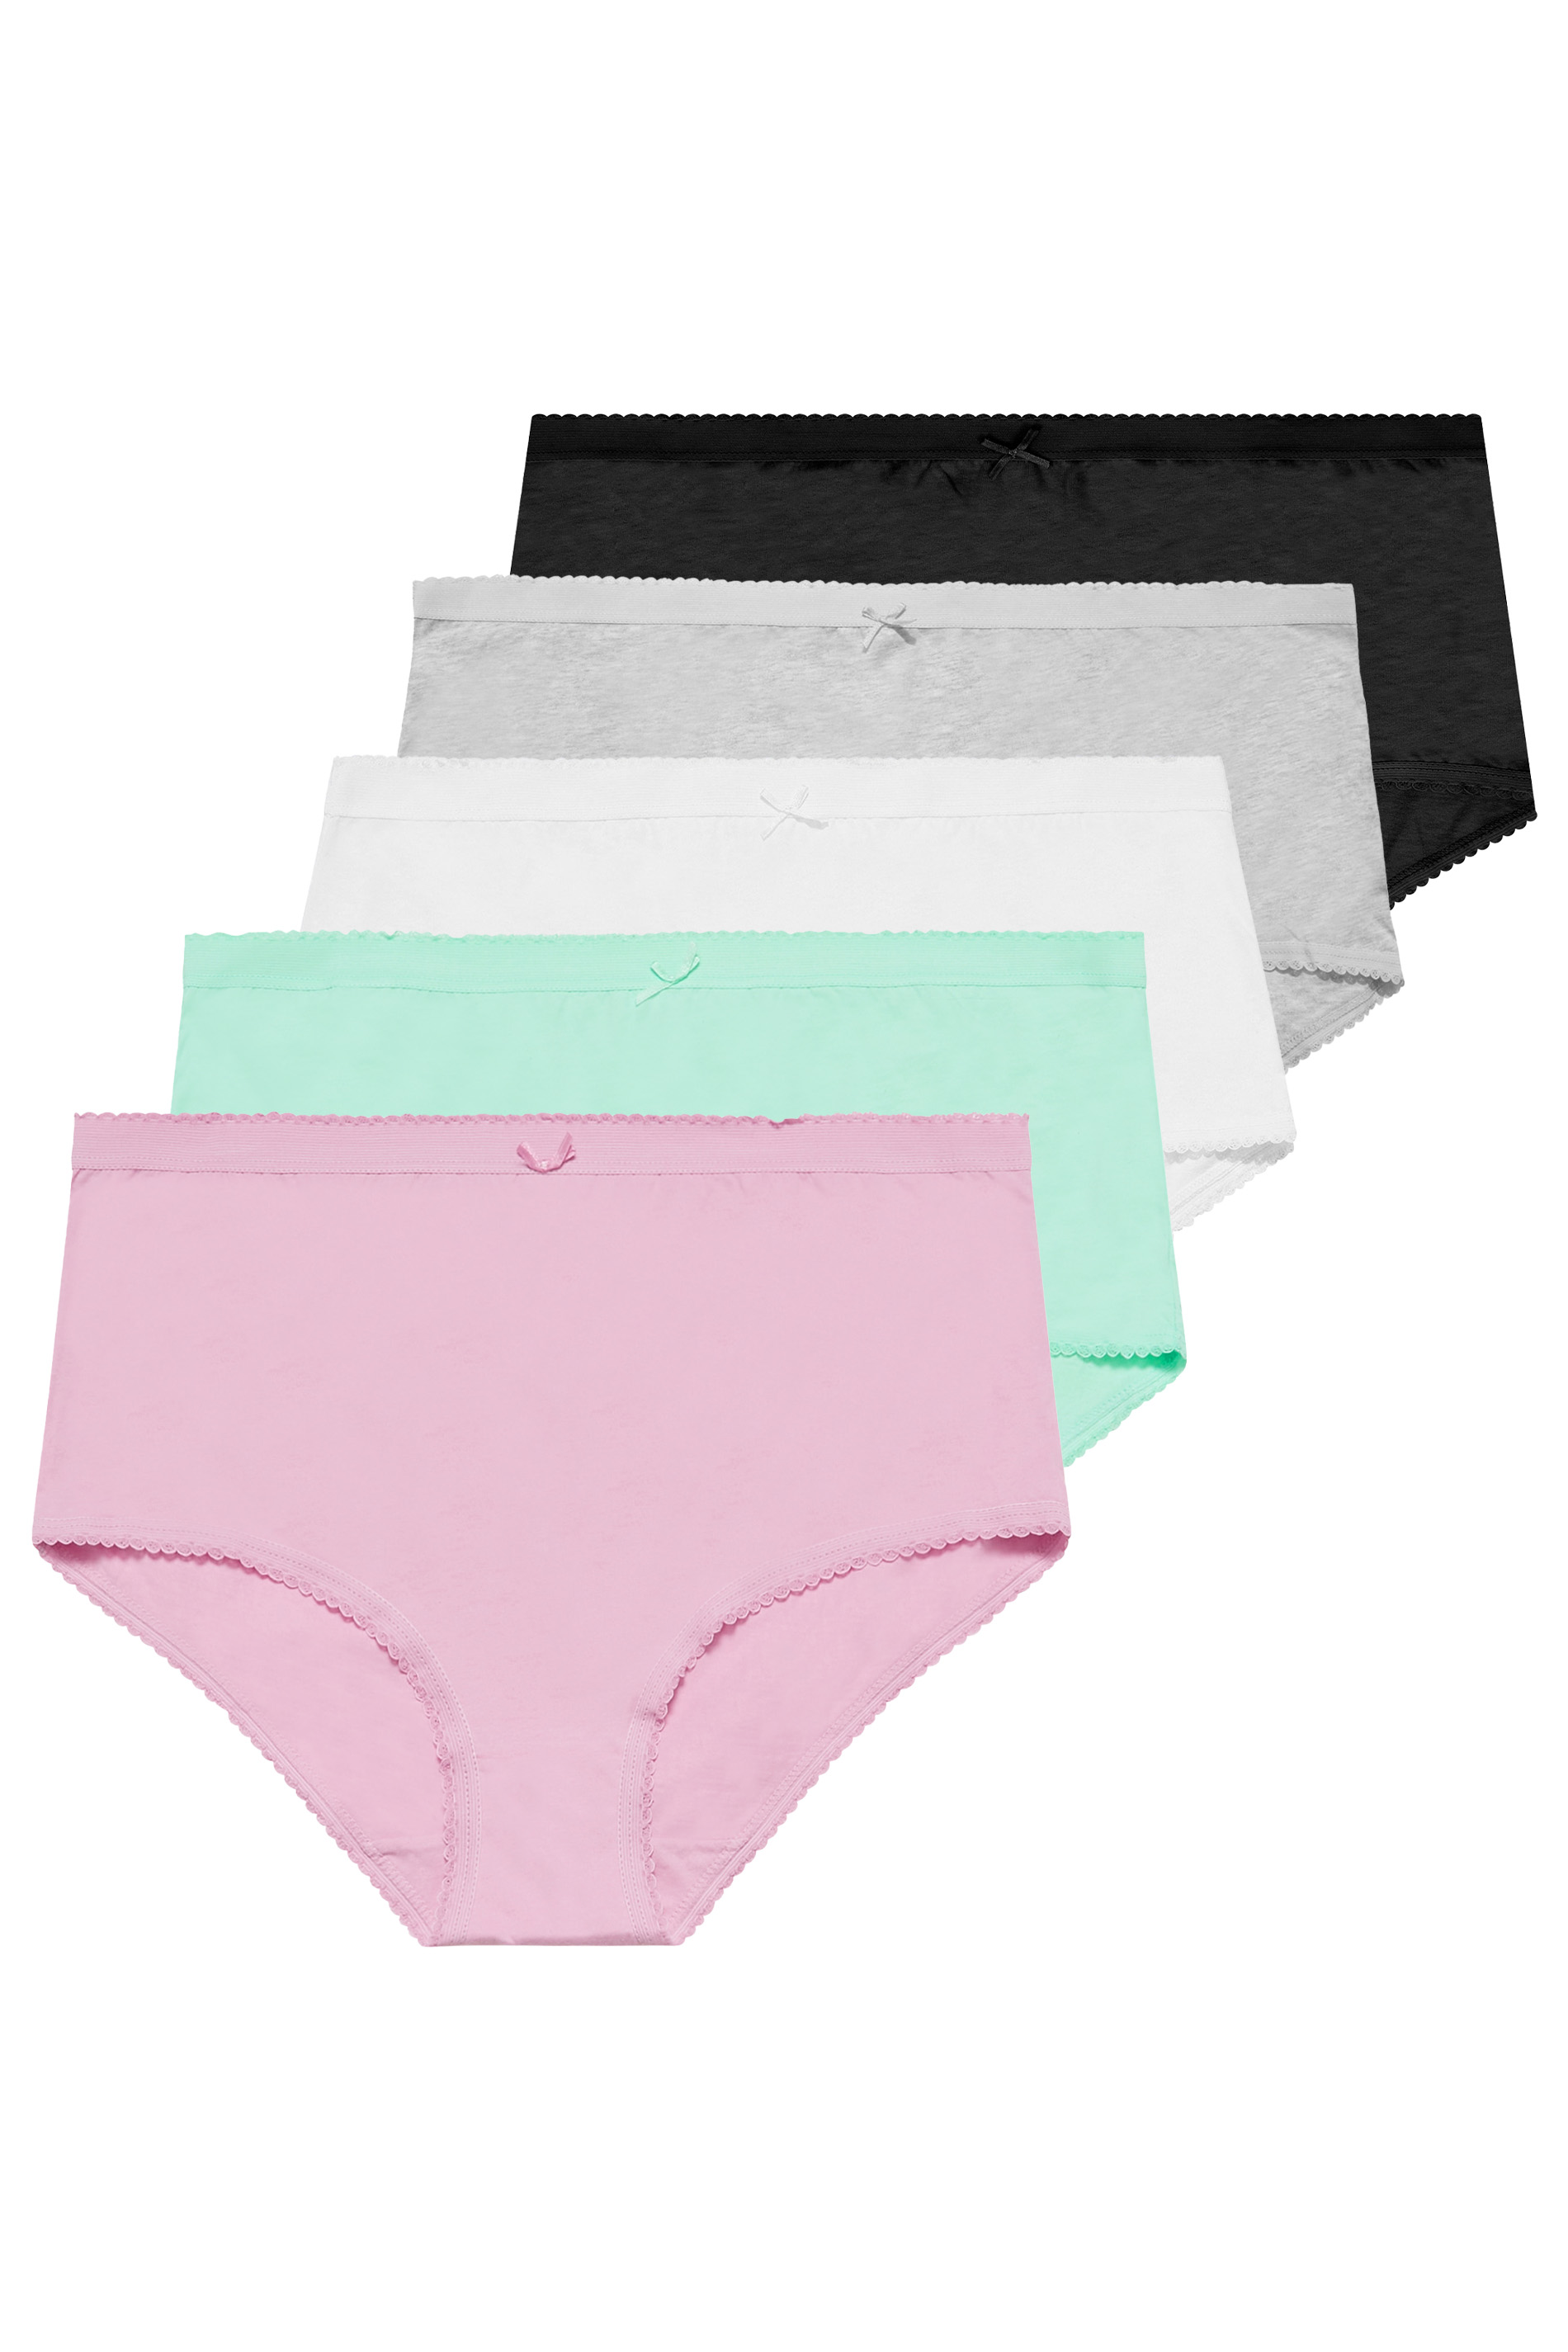 5 PACK Curve White & Bright Plain Cotton High Waisted Full Briefs | Yours Clothing 3